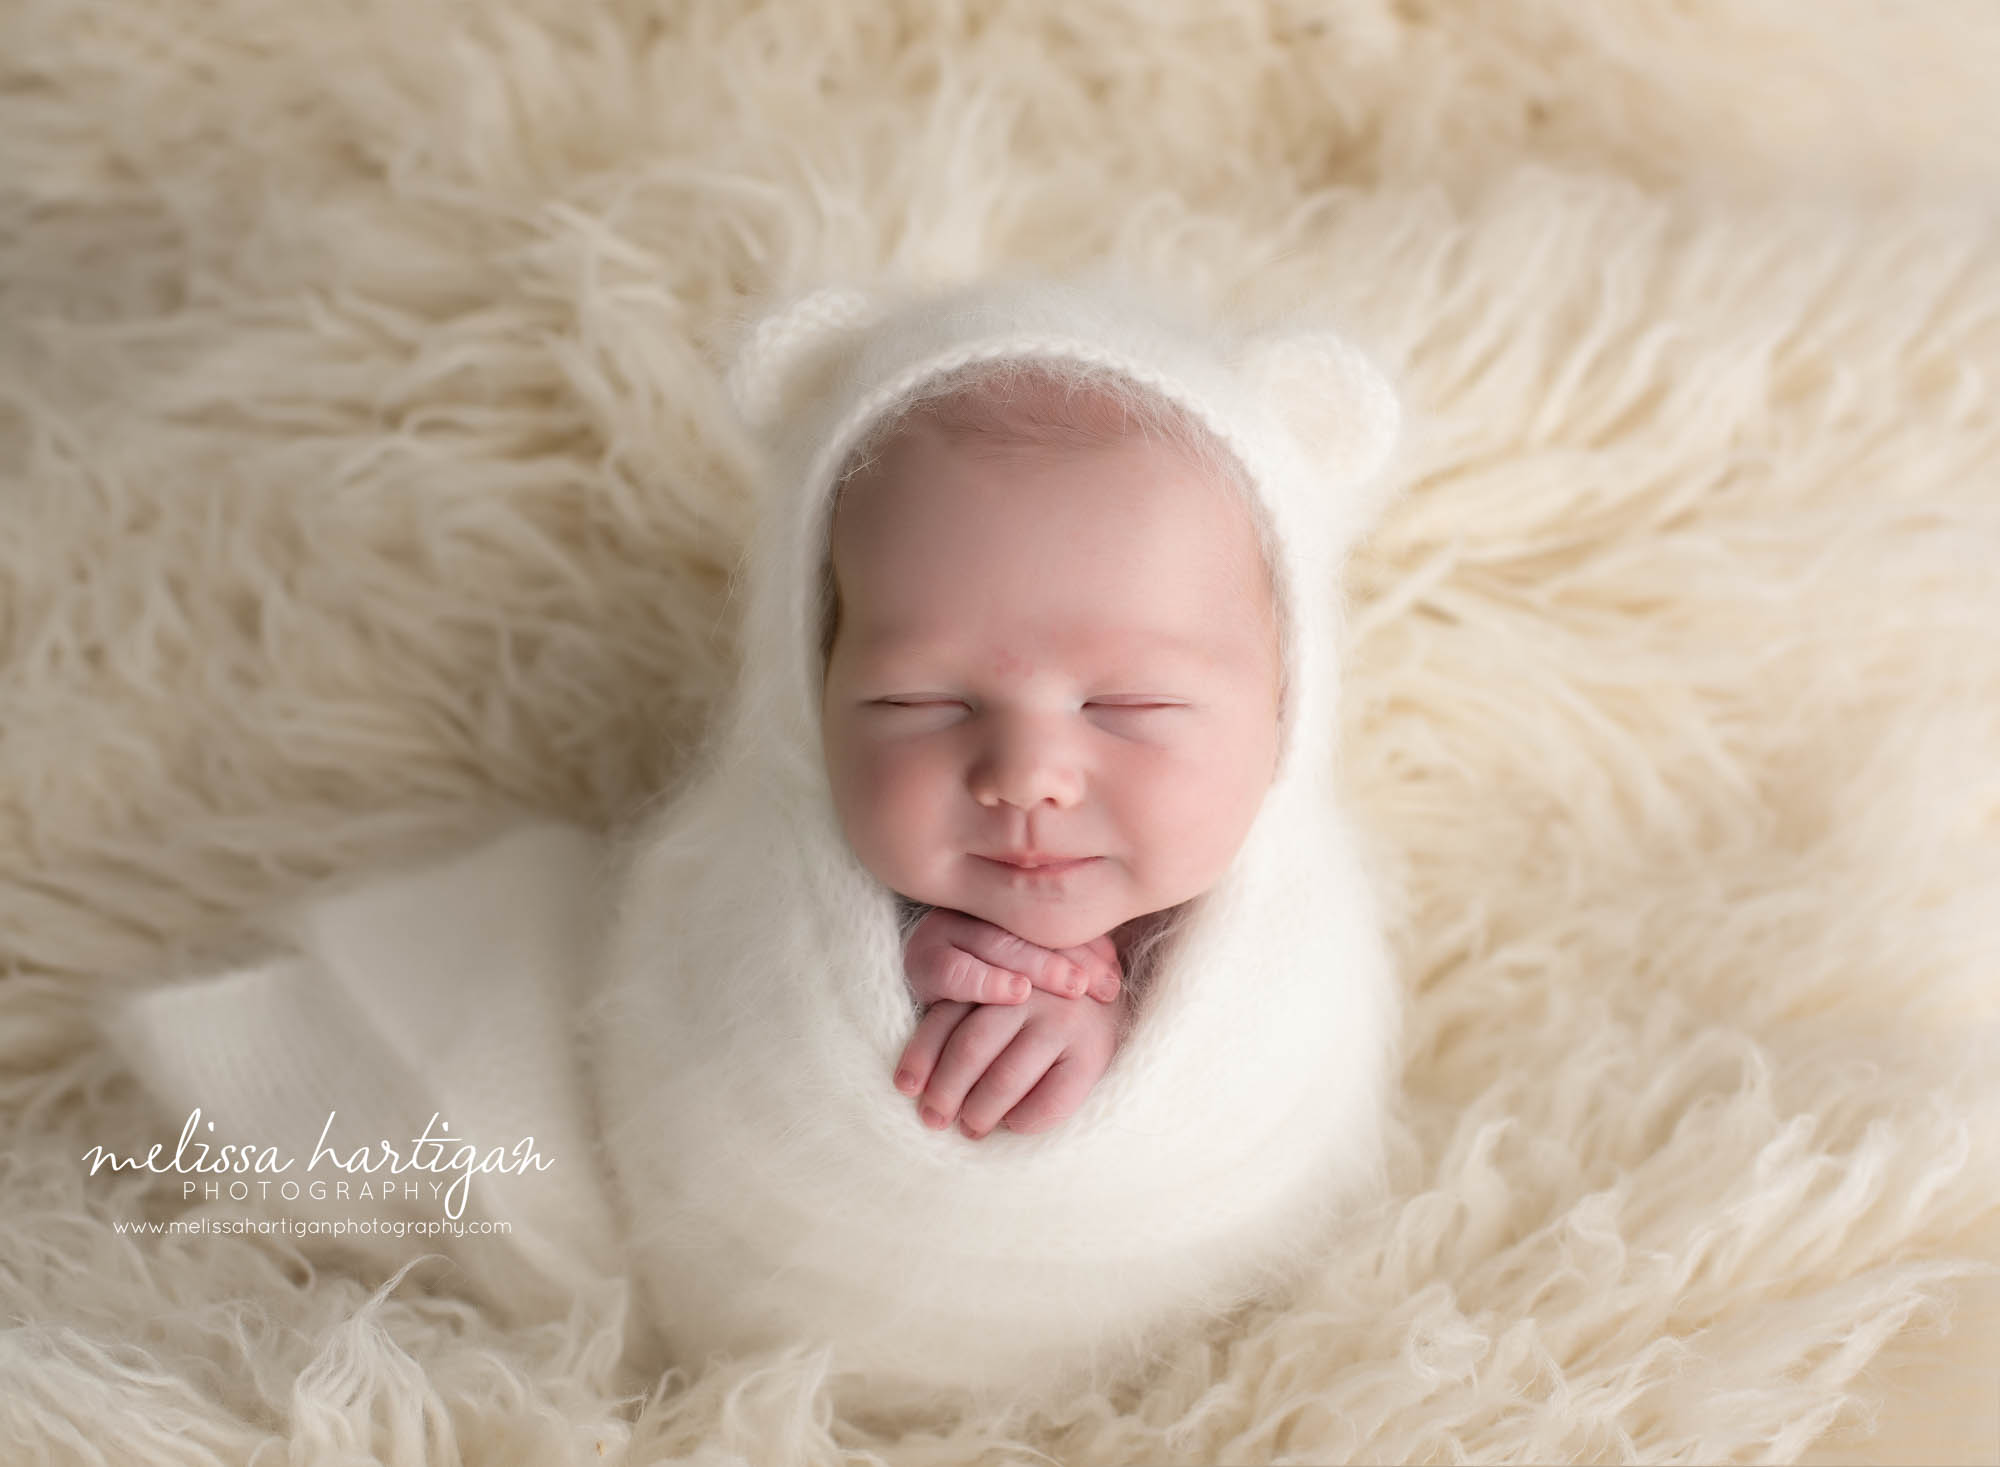 Newborn baby wrapped in knitted white wrap with knitted bear bonnet